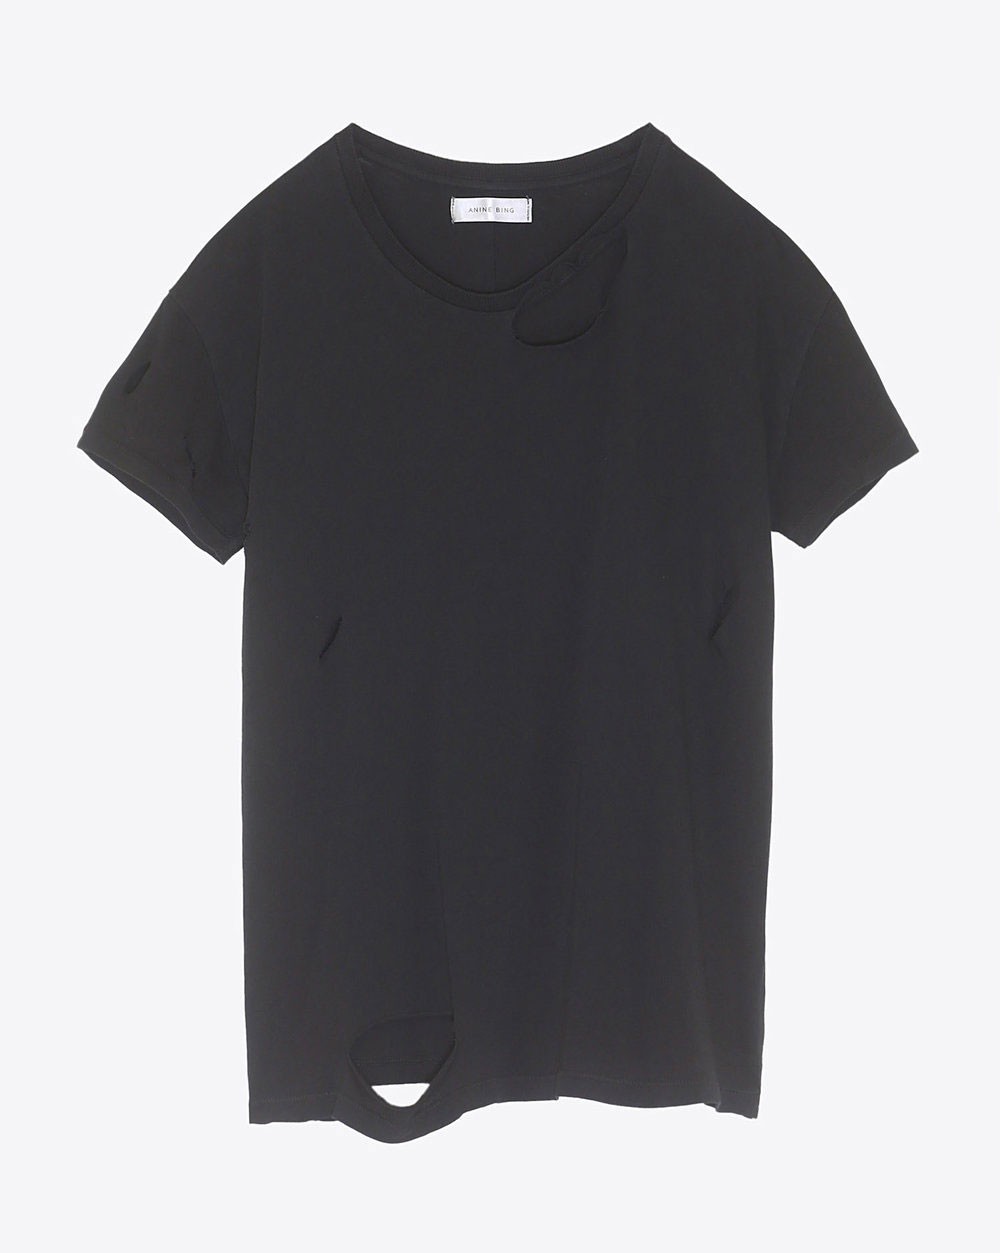 Anine Bing Permanent Distressed T-Shirt in Black 